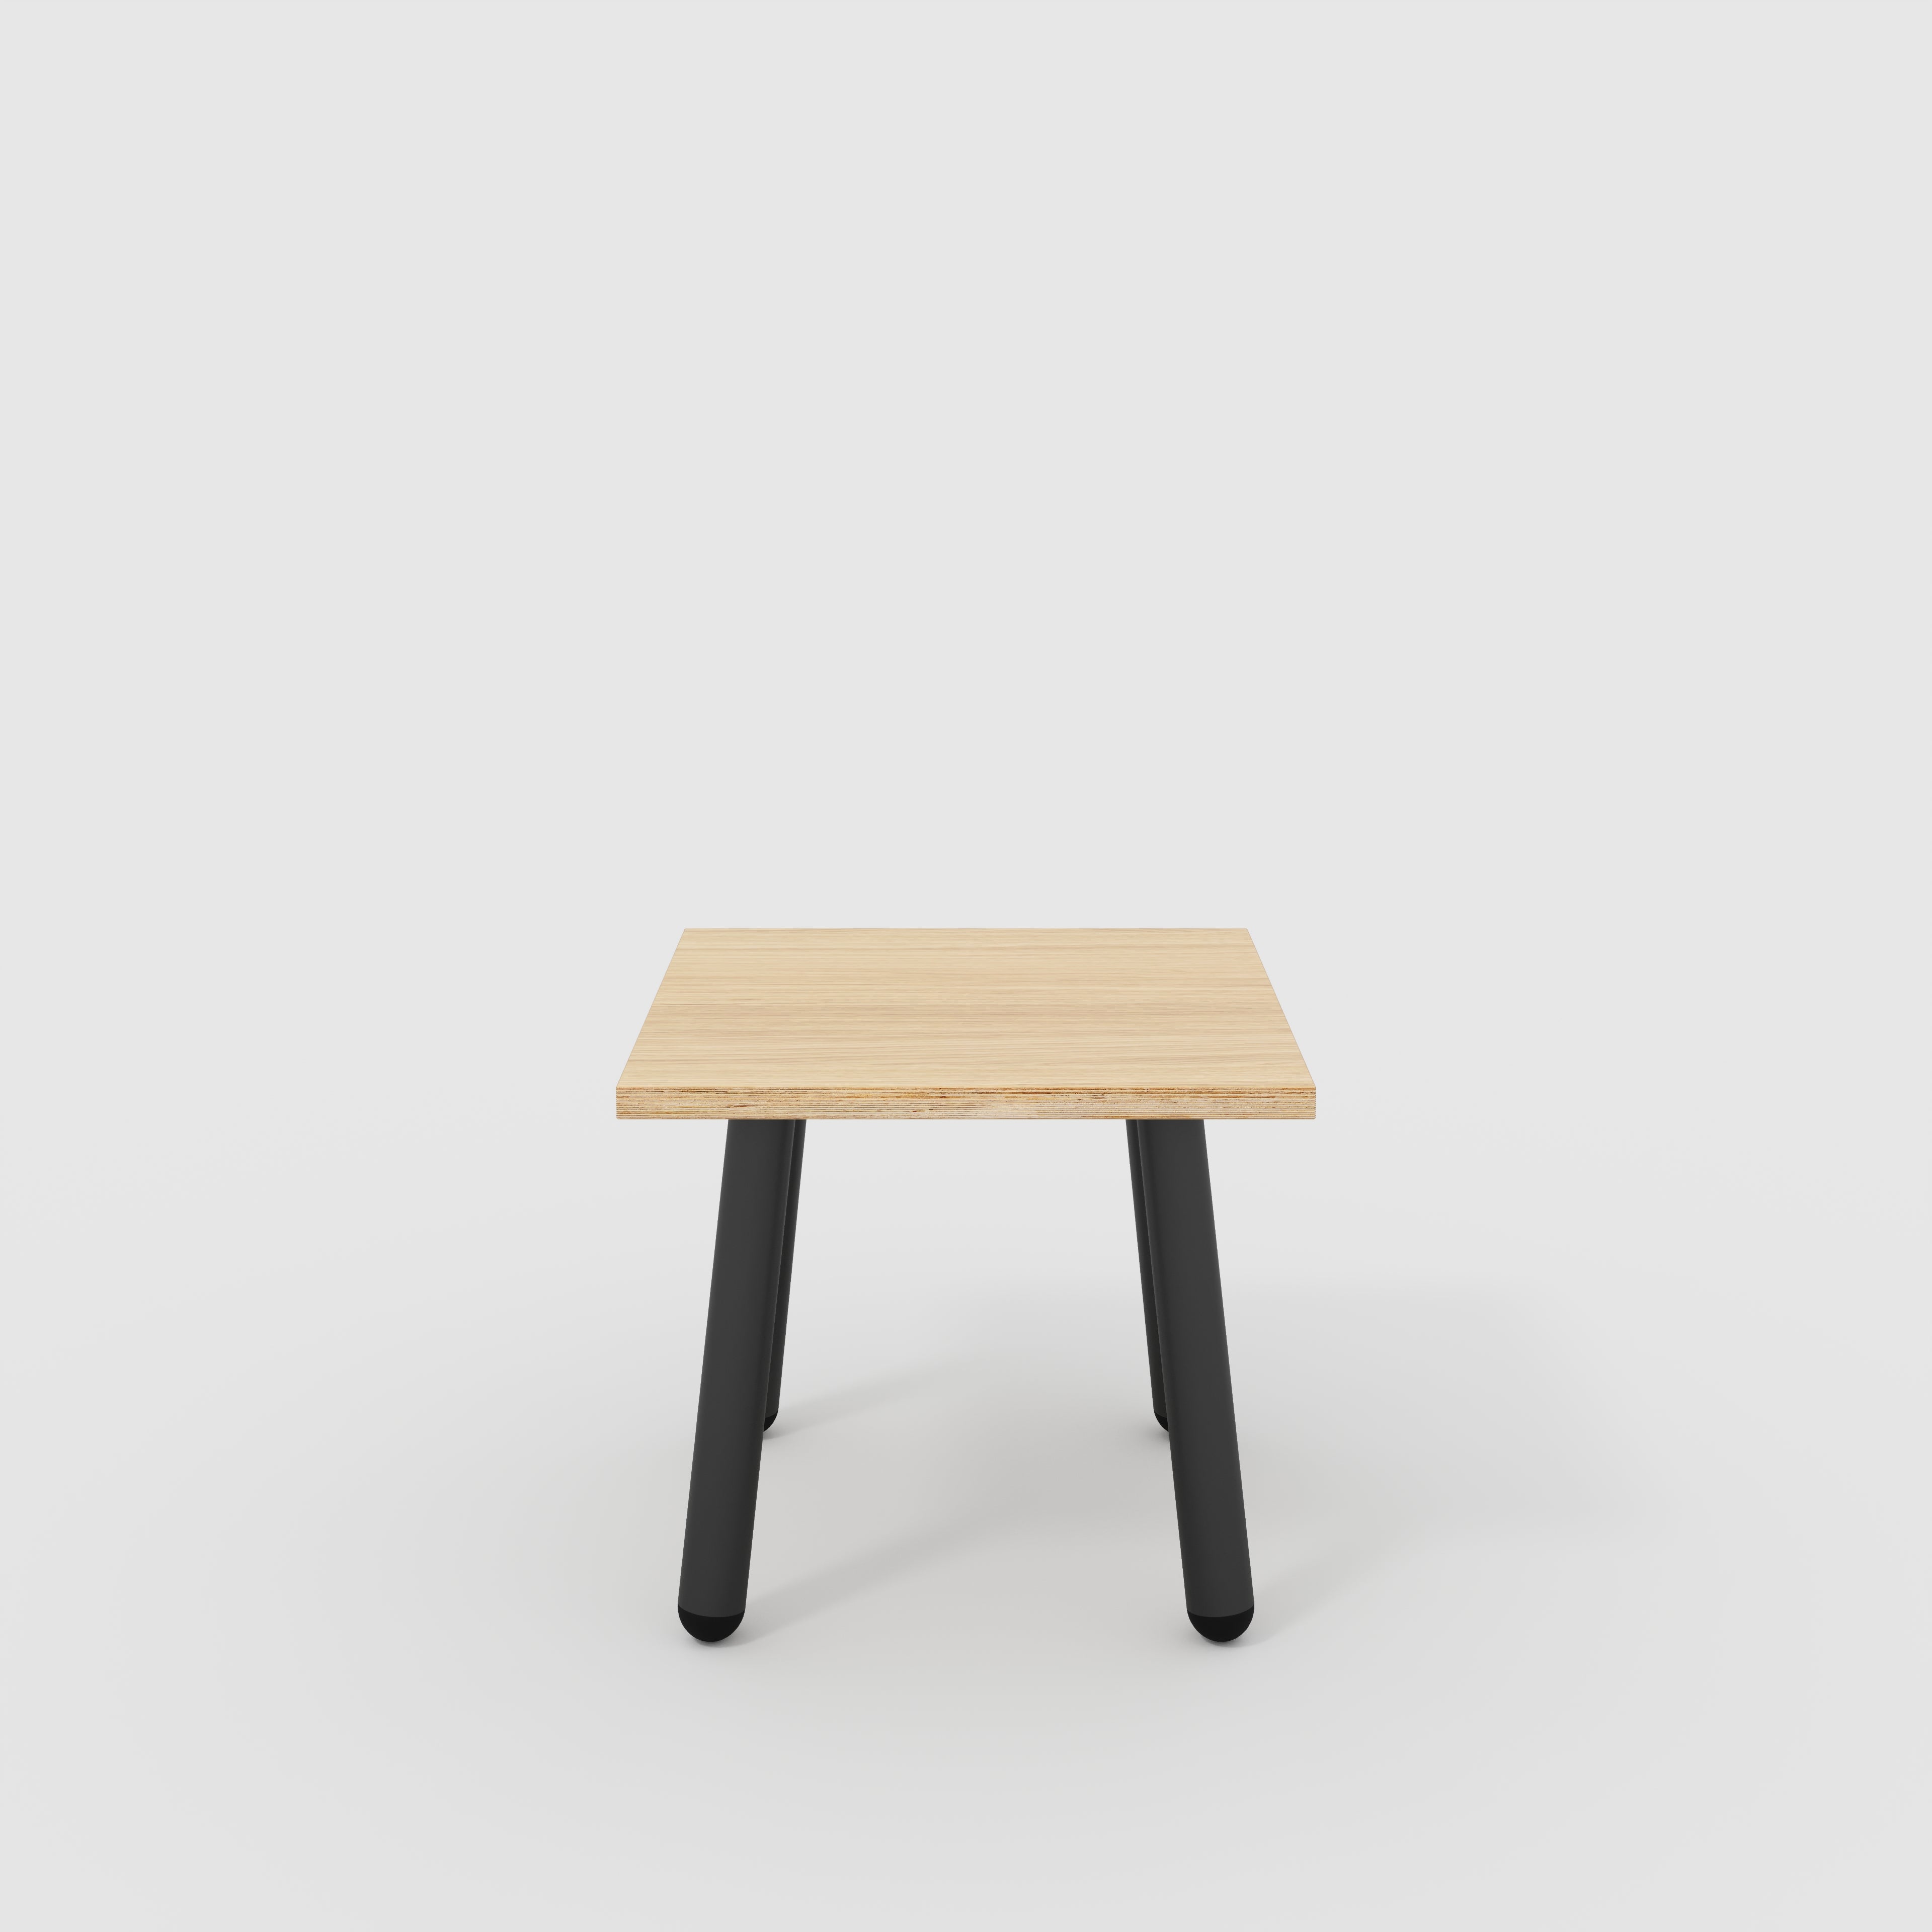 Side Table with Round Single Pin Legs - Plywood Oak - 500(w) x 500(d) x 425(h)